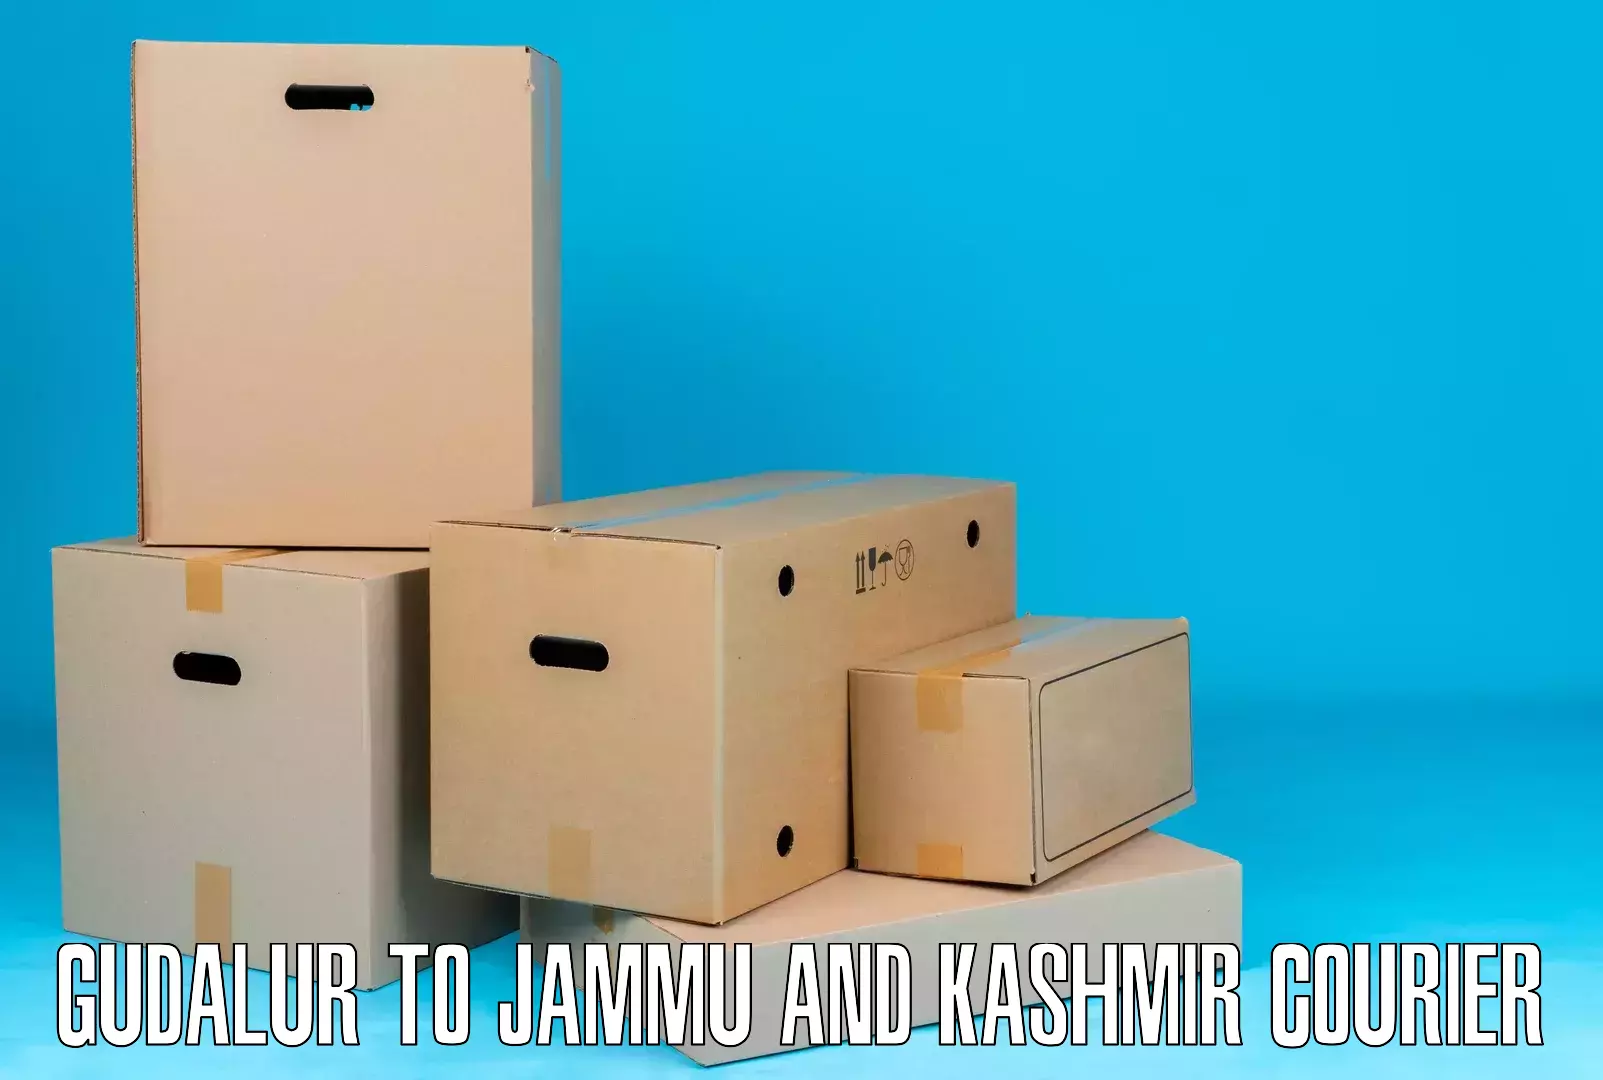 Professional courier handling Gudalur to Akhnoor